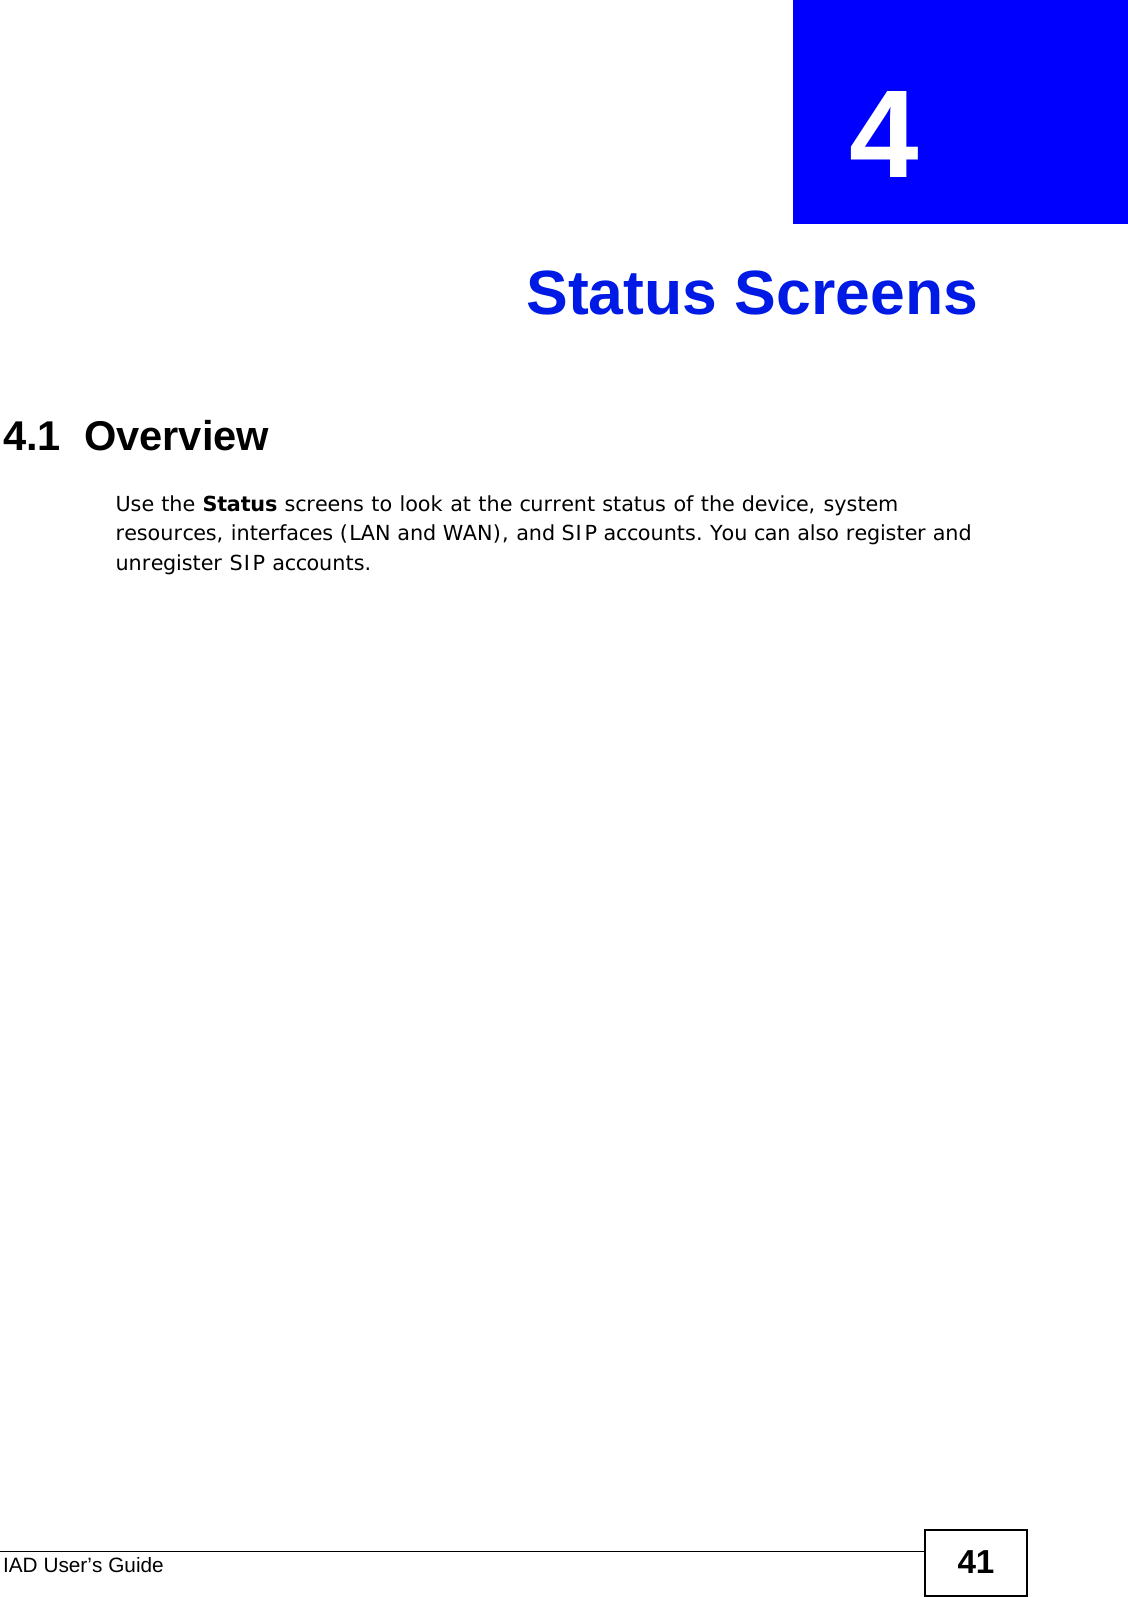 IAD User’s Guide 41CHAPTER  4 Status Screens4.1  OverviewUse the Status screens to look at the current status of the device, system resources, interfaces (LAN and WAN), and SIP accounts. You can also register and unregister SIP accounts.